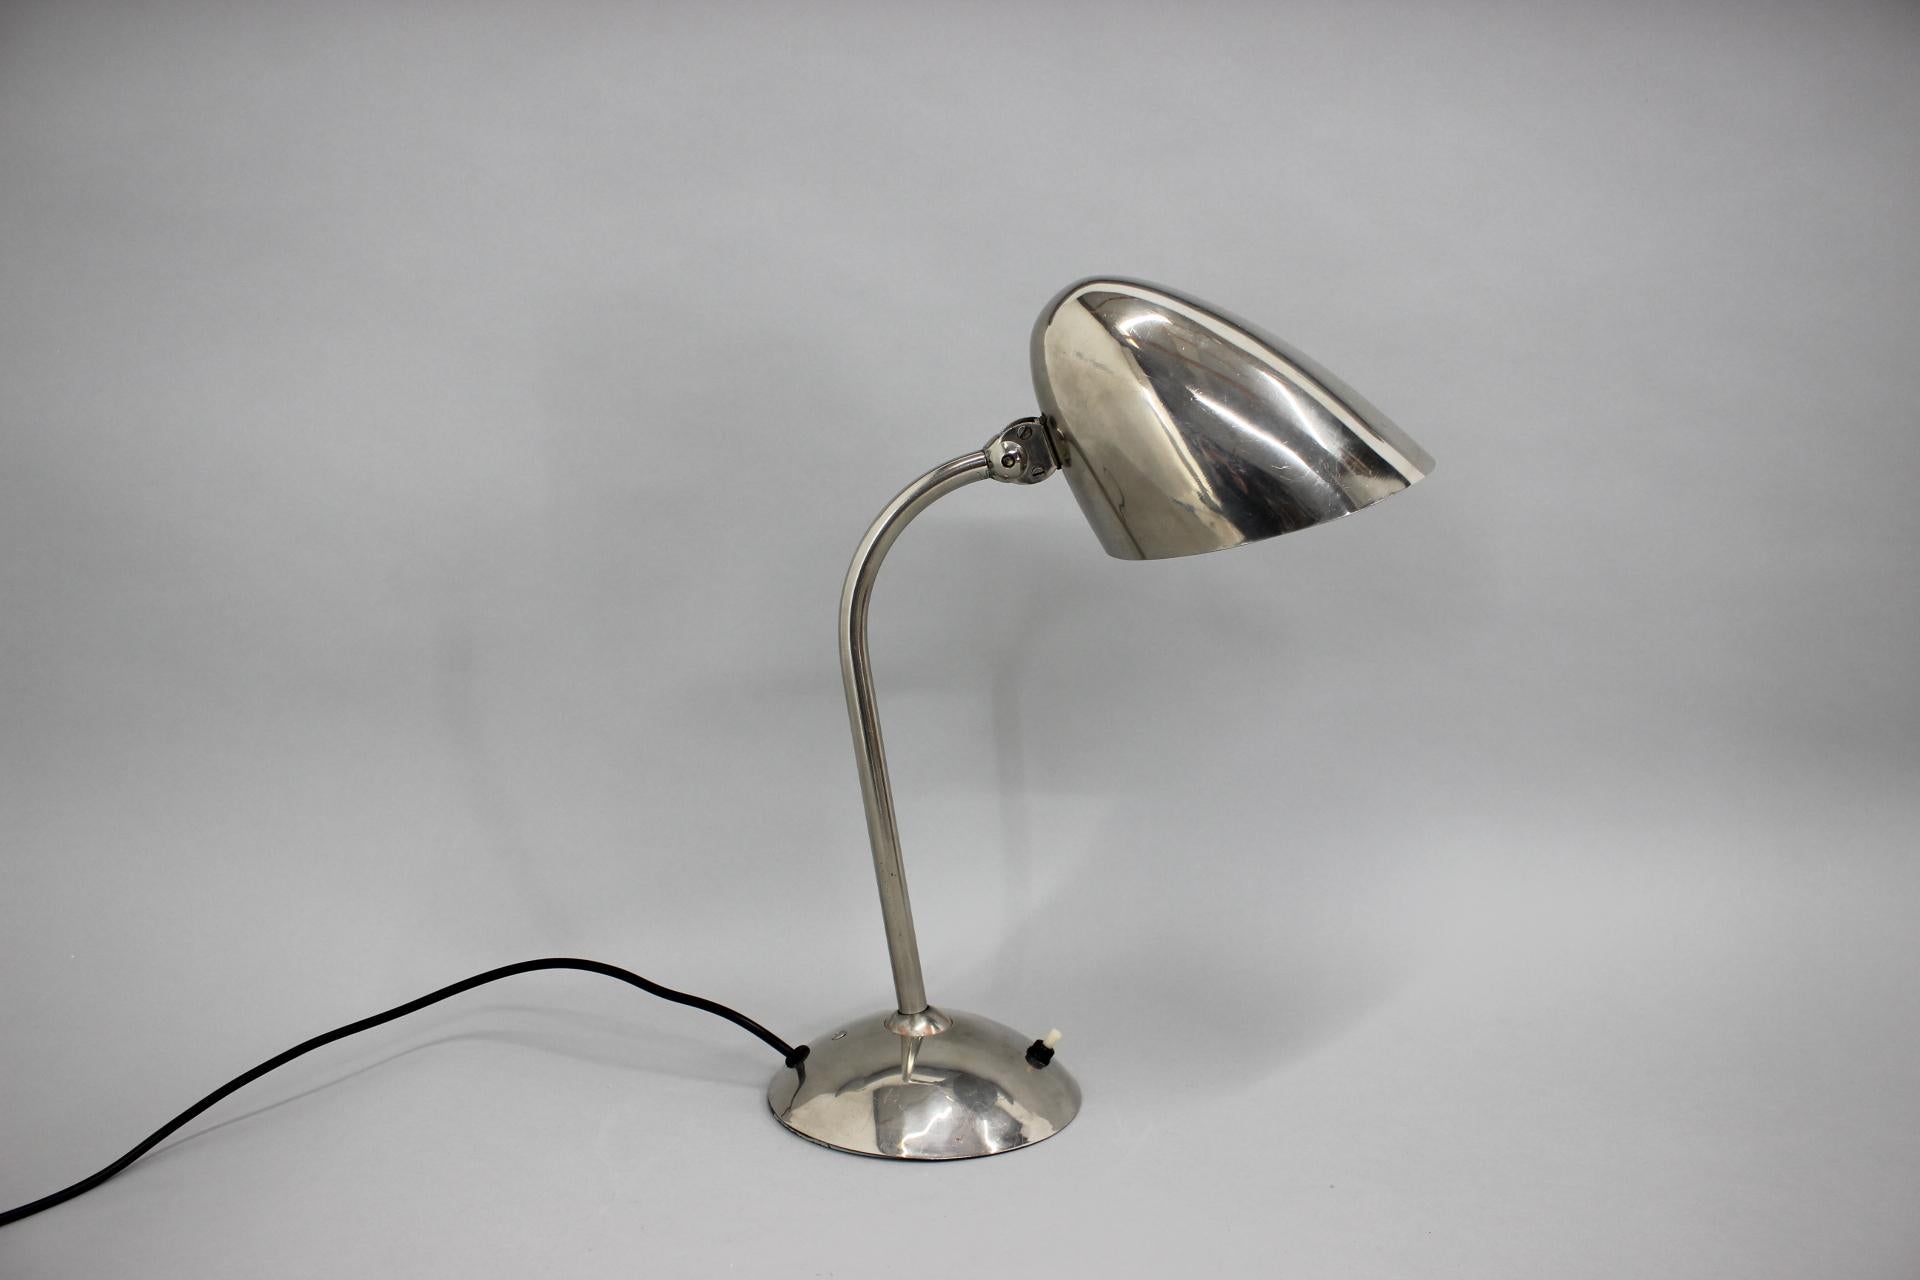 - Flexible nickel-plated table lamp produced by IAS in 1930s
- Very good original condition
- Rewired: 1 x 40W, E25-E27 bulb
- US plug adapter included.